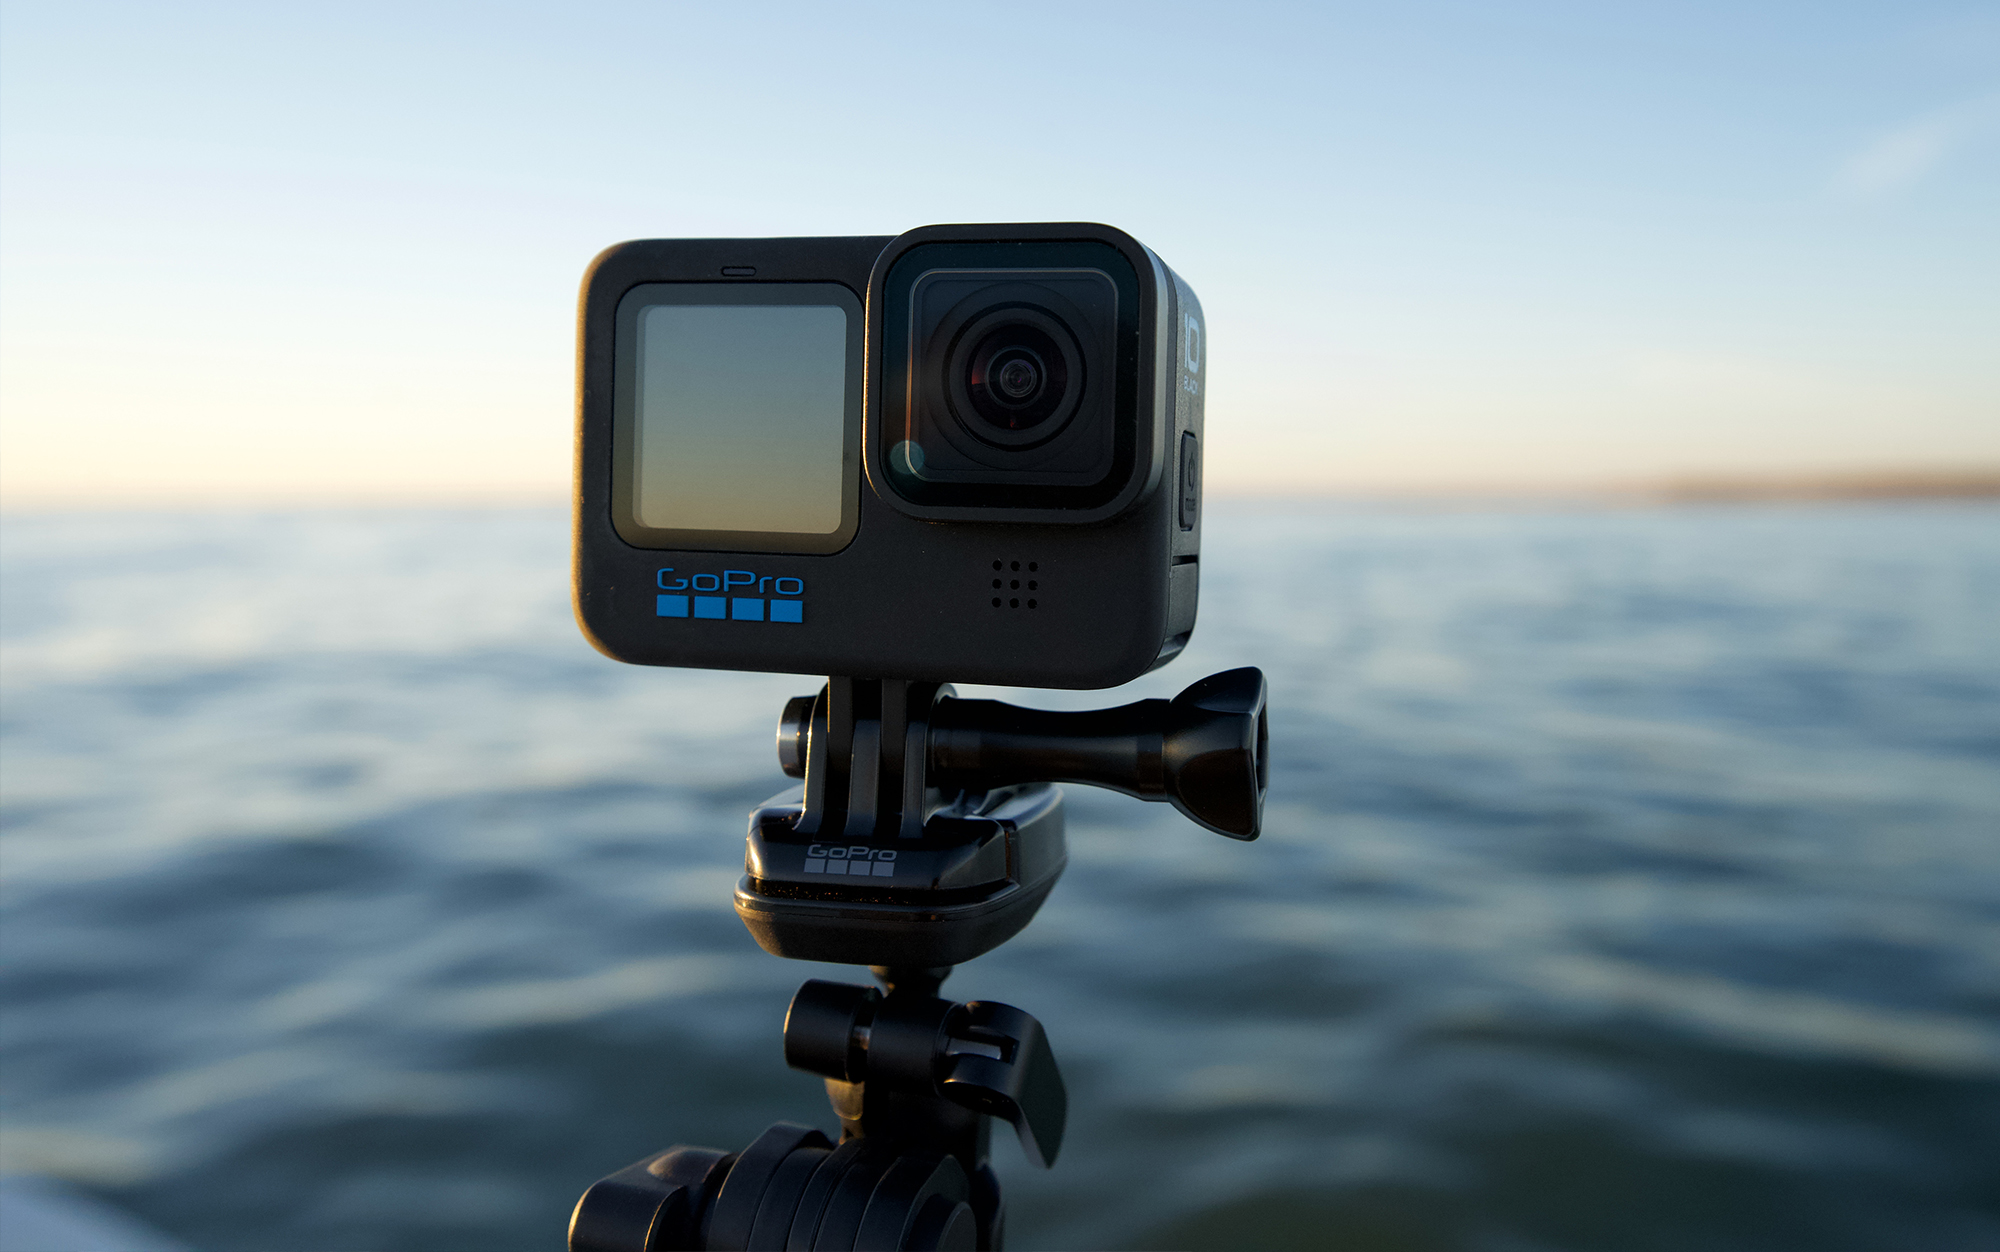 We reviewed the best action cameras.